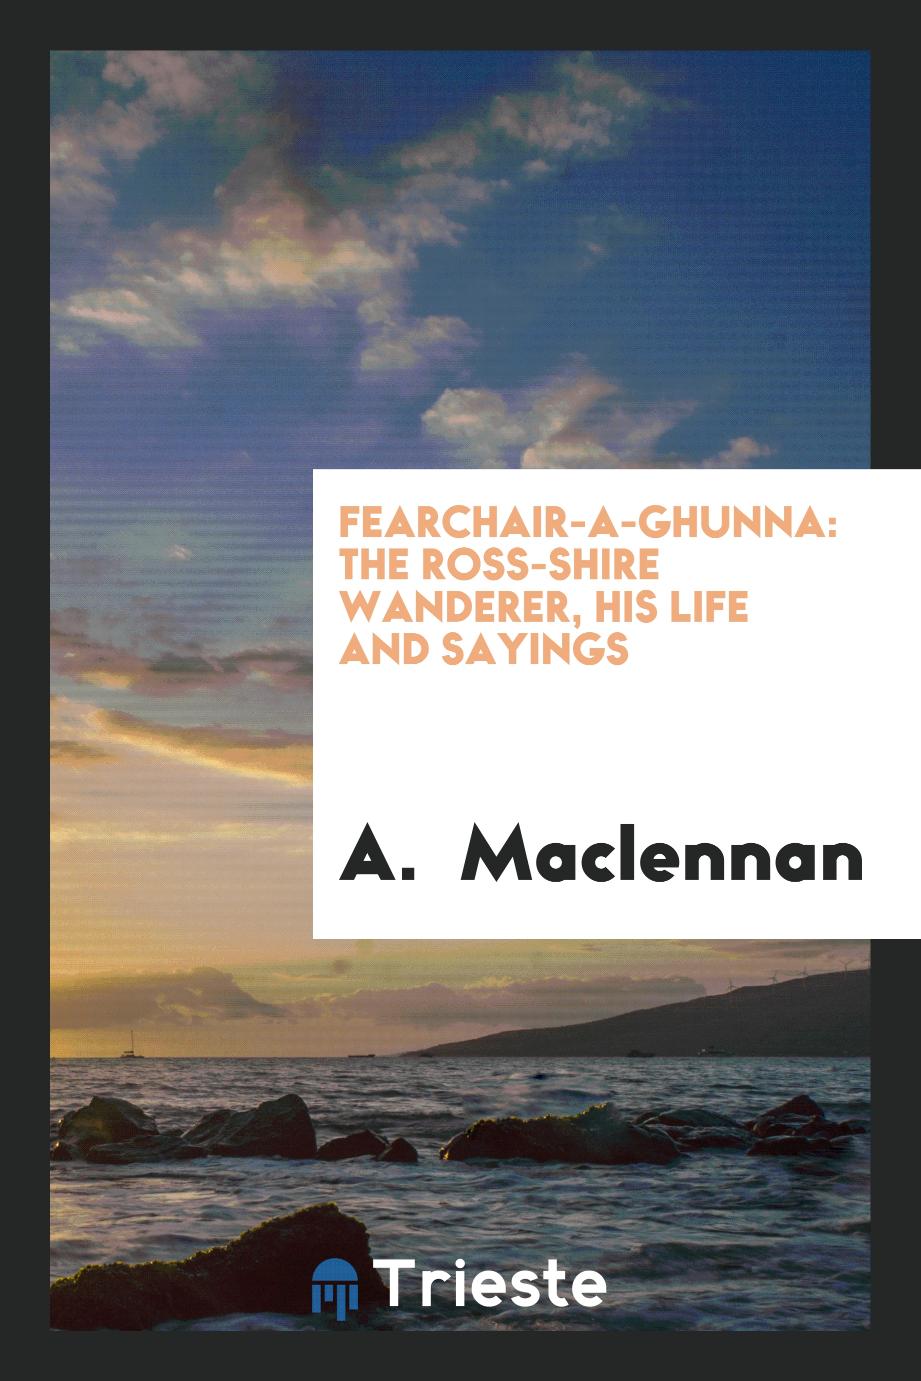 Fearchair-a-Ghunna: The Ross-shire Wanderer, His Life and Sayings